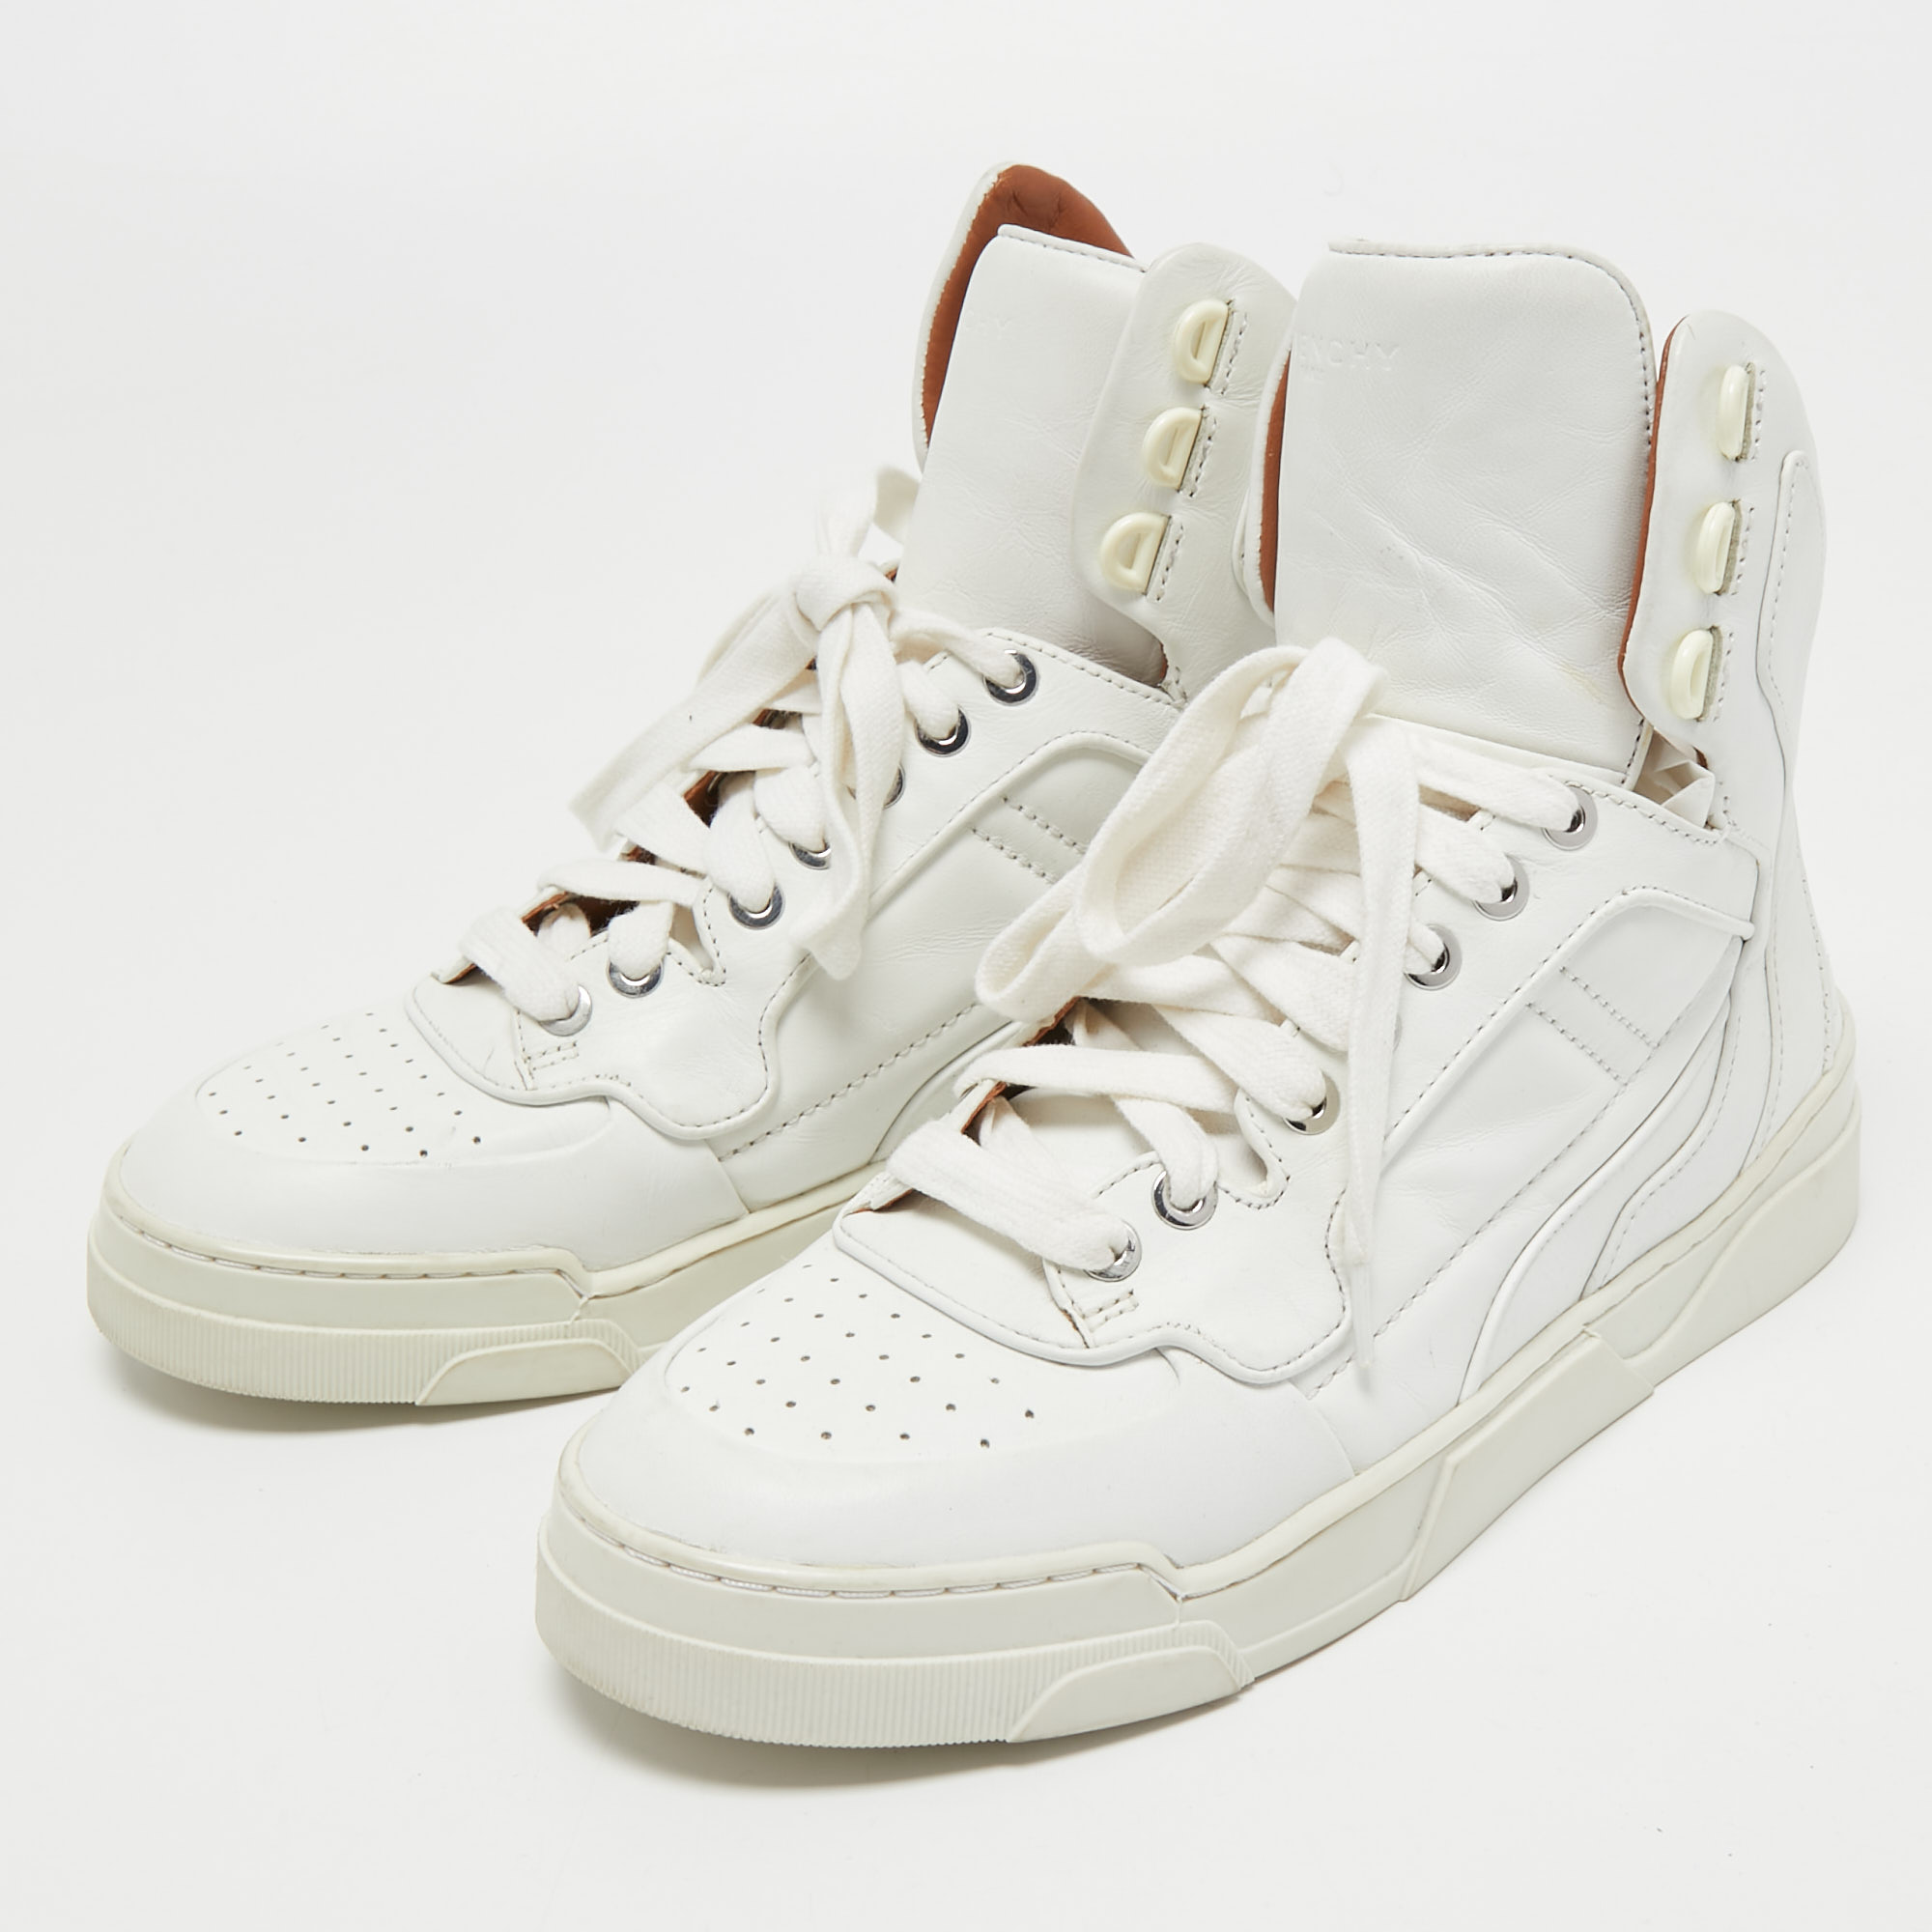 

Givenchy White Leather Tyson Star Studded High Top Sneakers Size